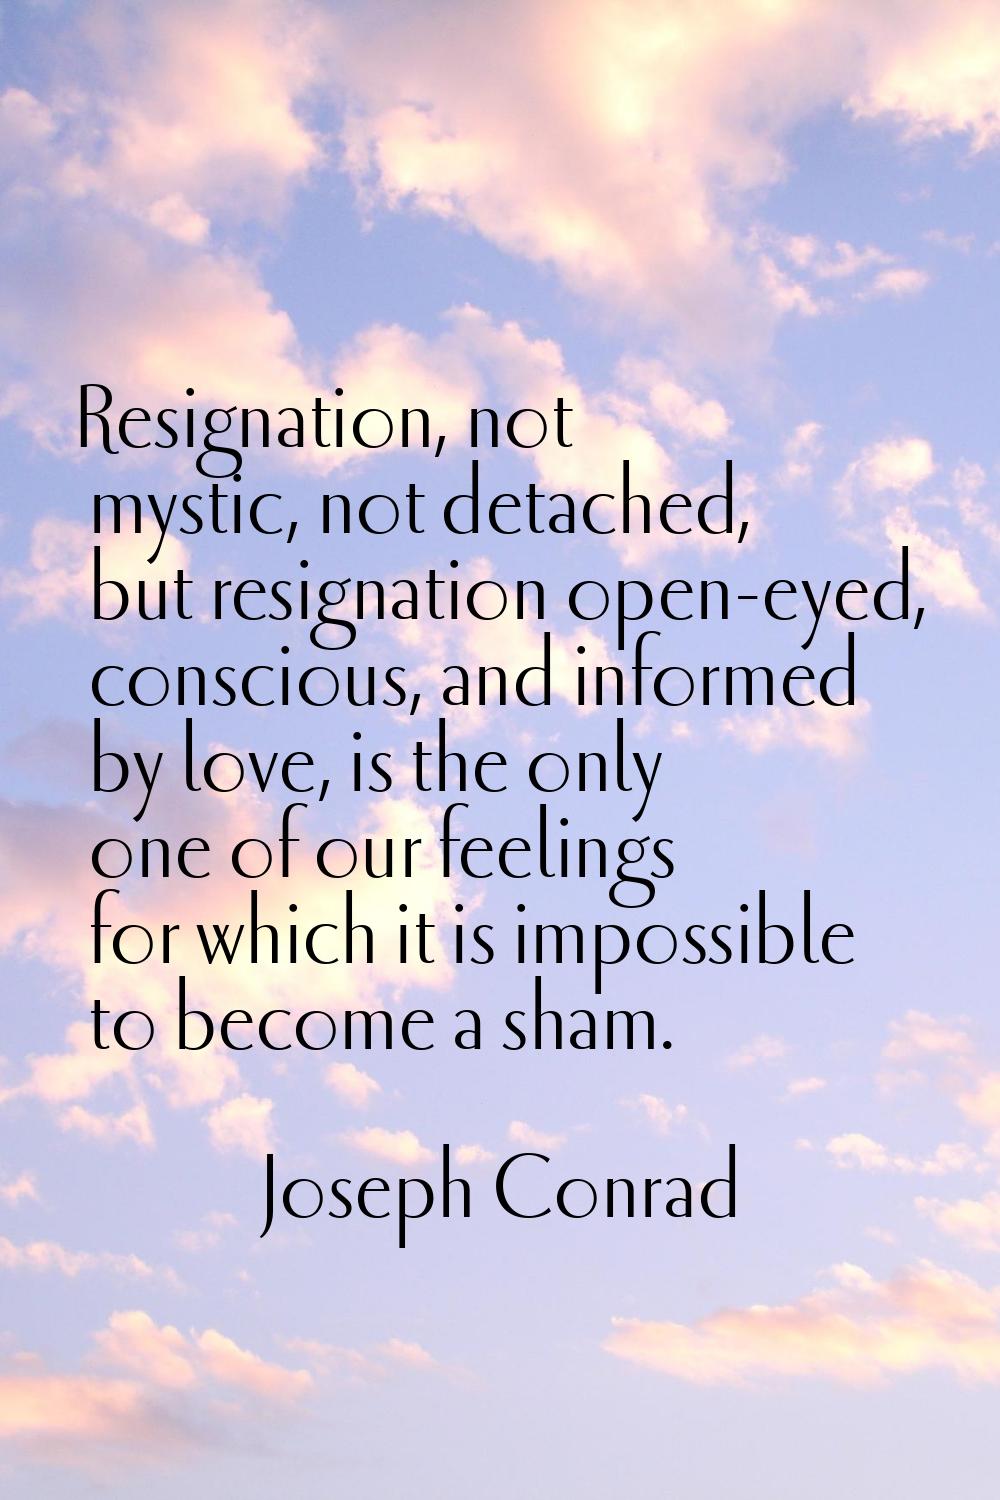 Resignation, not mystic, not detached, but resignation open-eyed, conscious, and informed by love, 